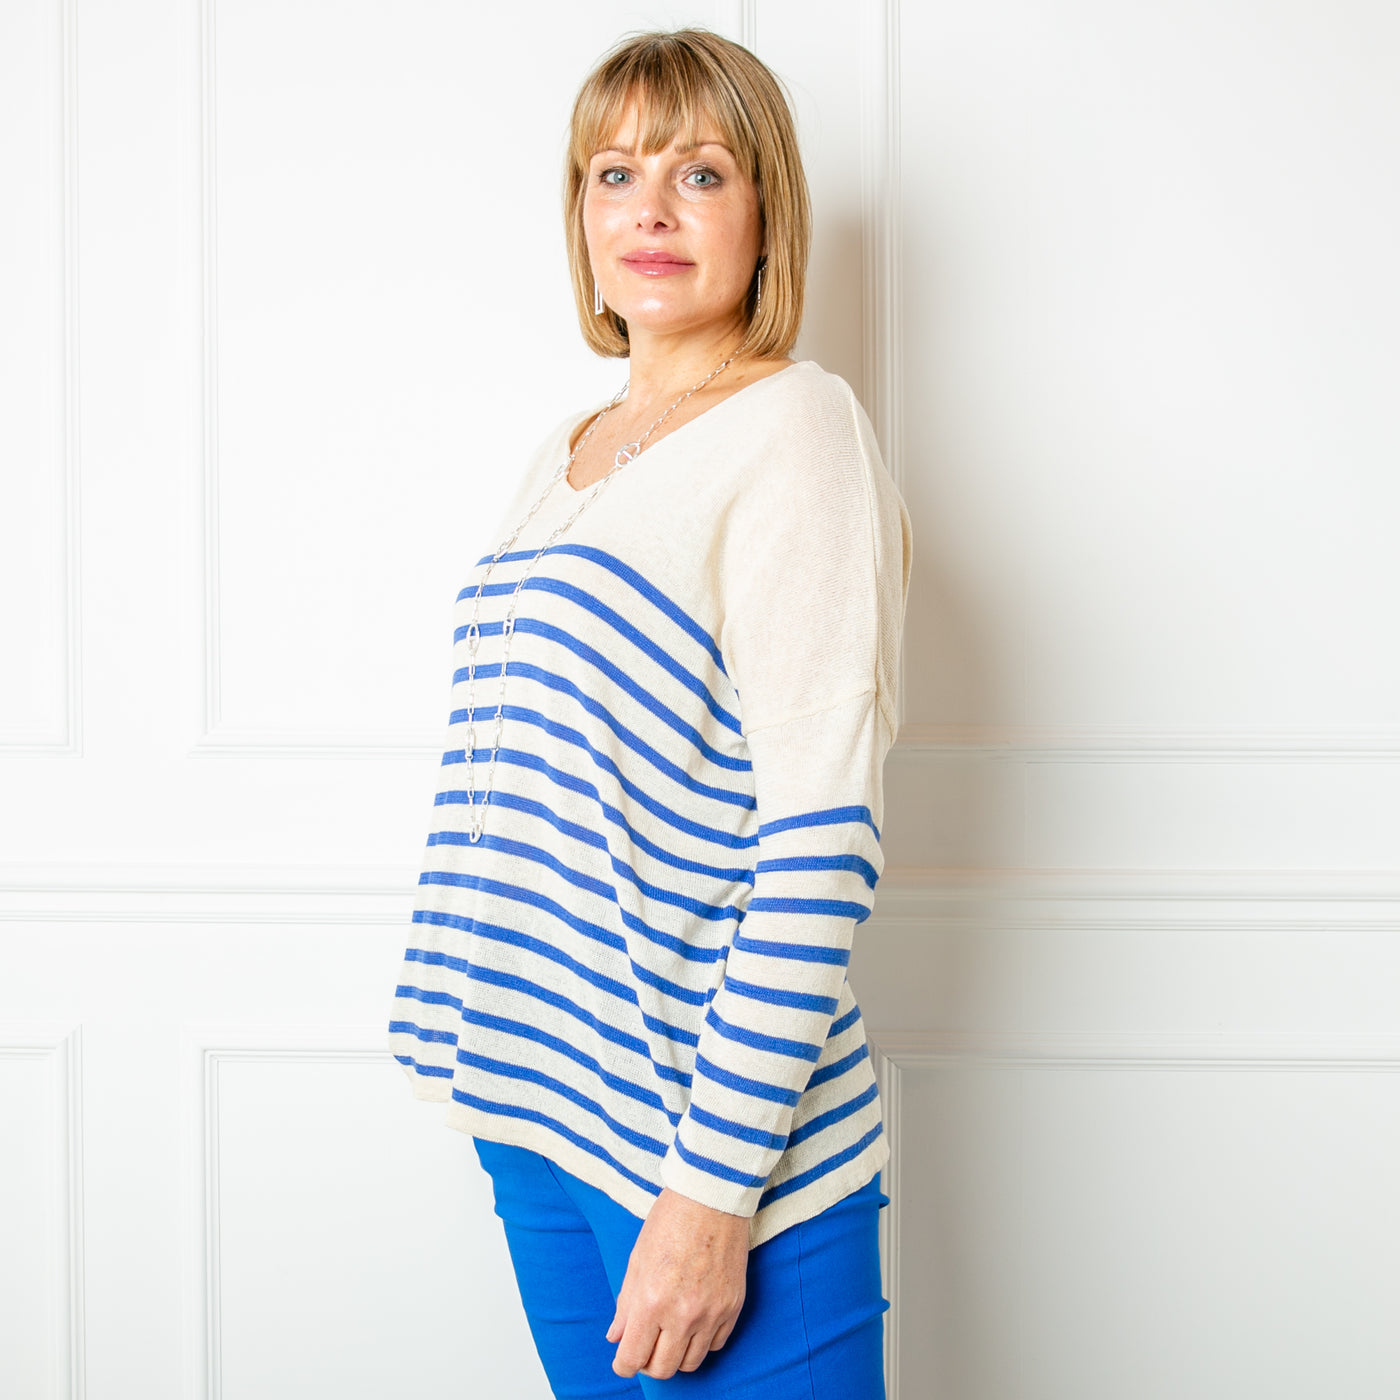 The Fine Knit Stripe Jumper in cream with royal blue stripes across the sleeves and body